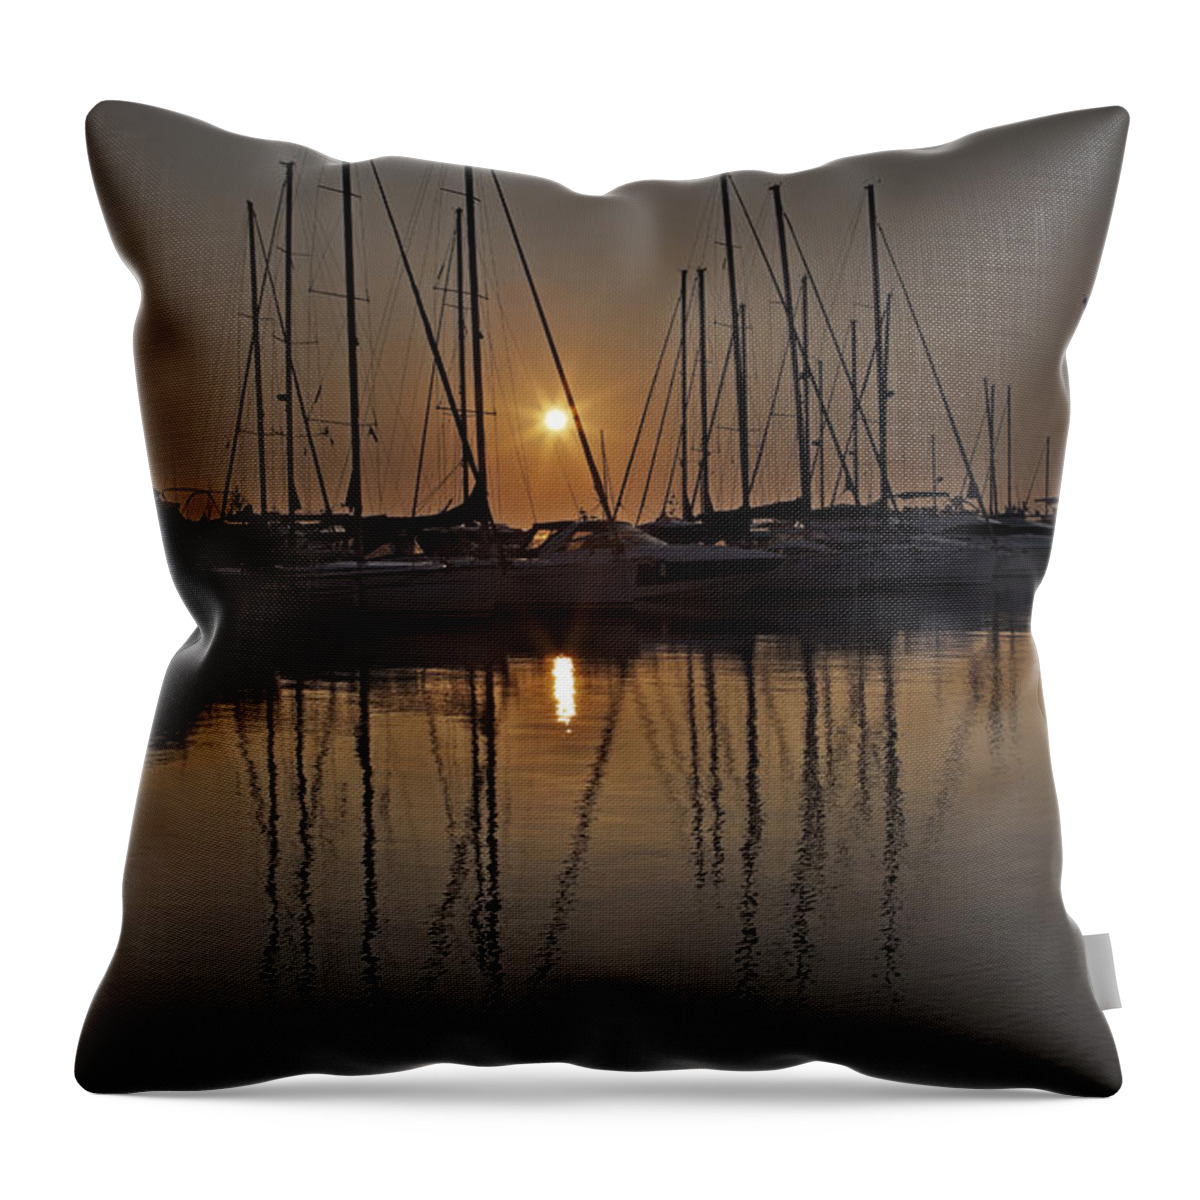 Boats Throw Pillow featuring the photograph Sunset #1 by Joana Kruse